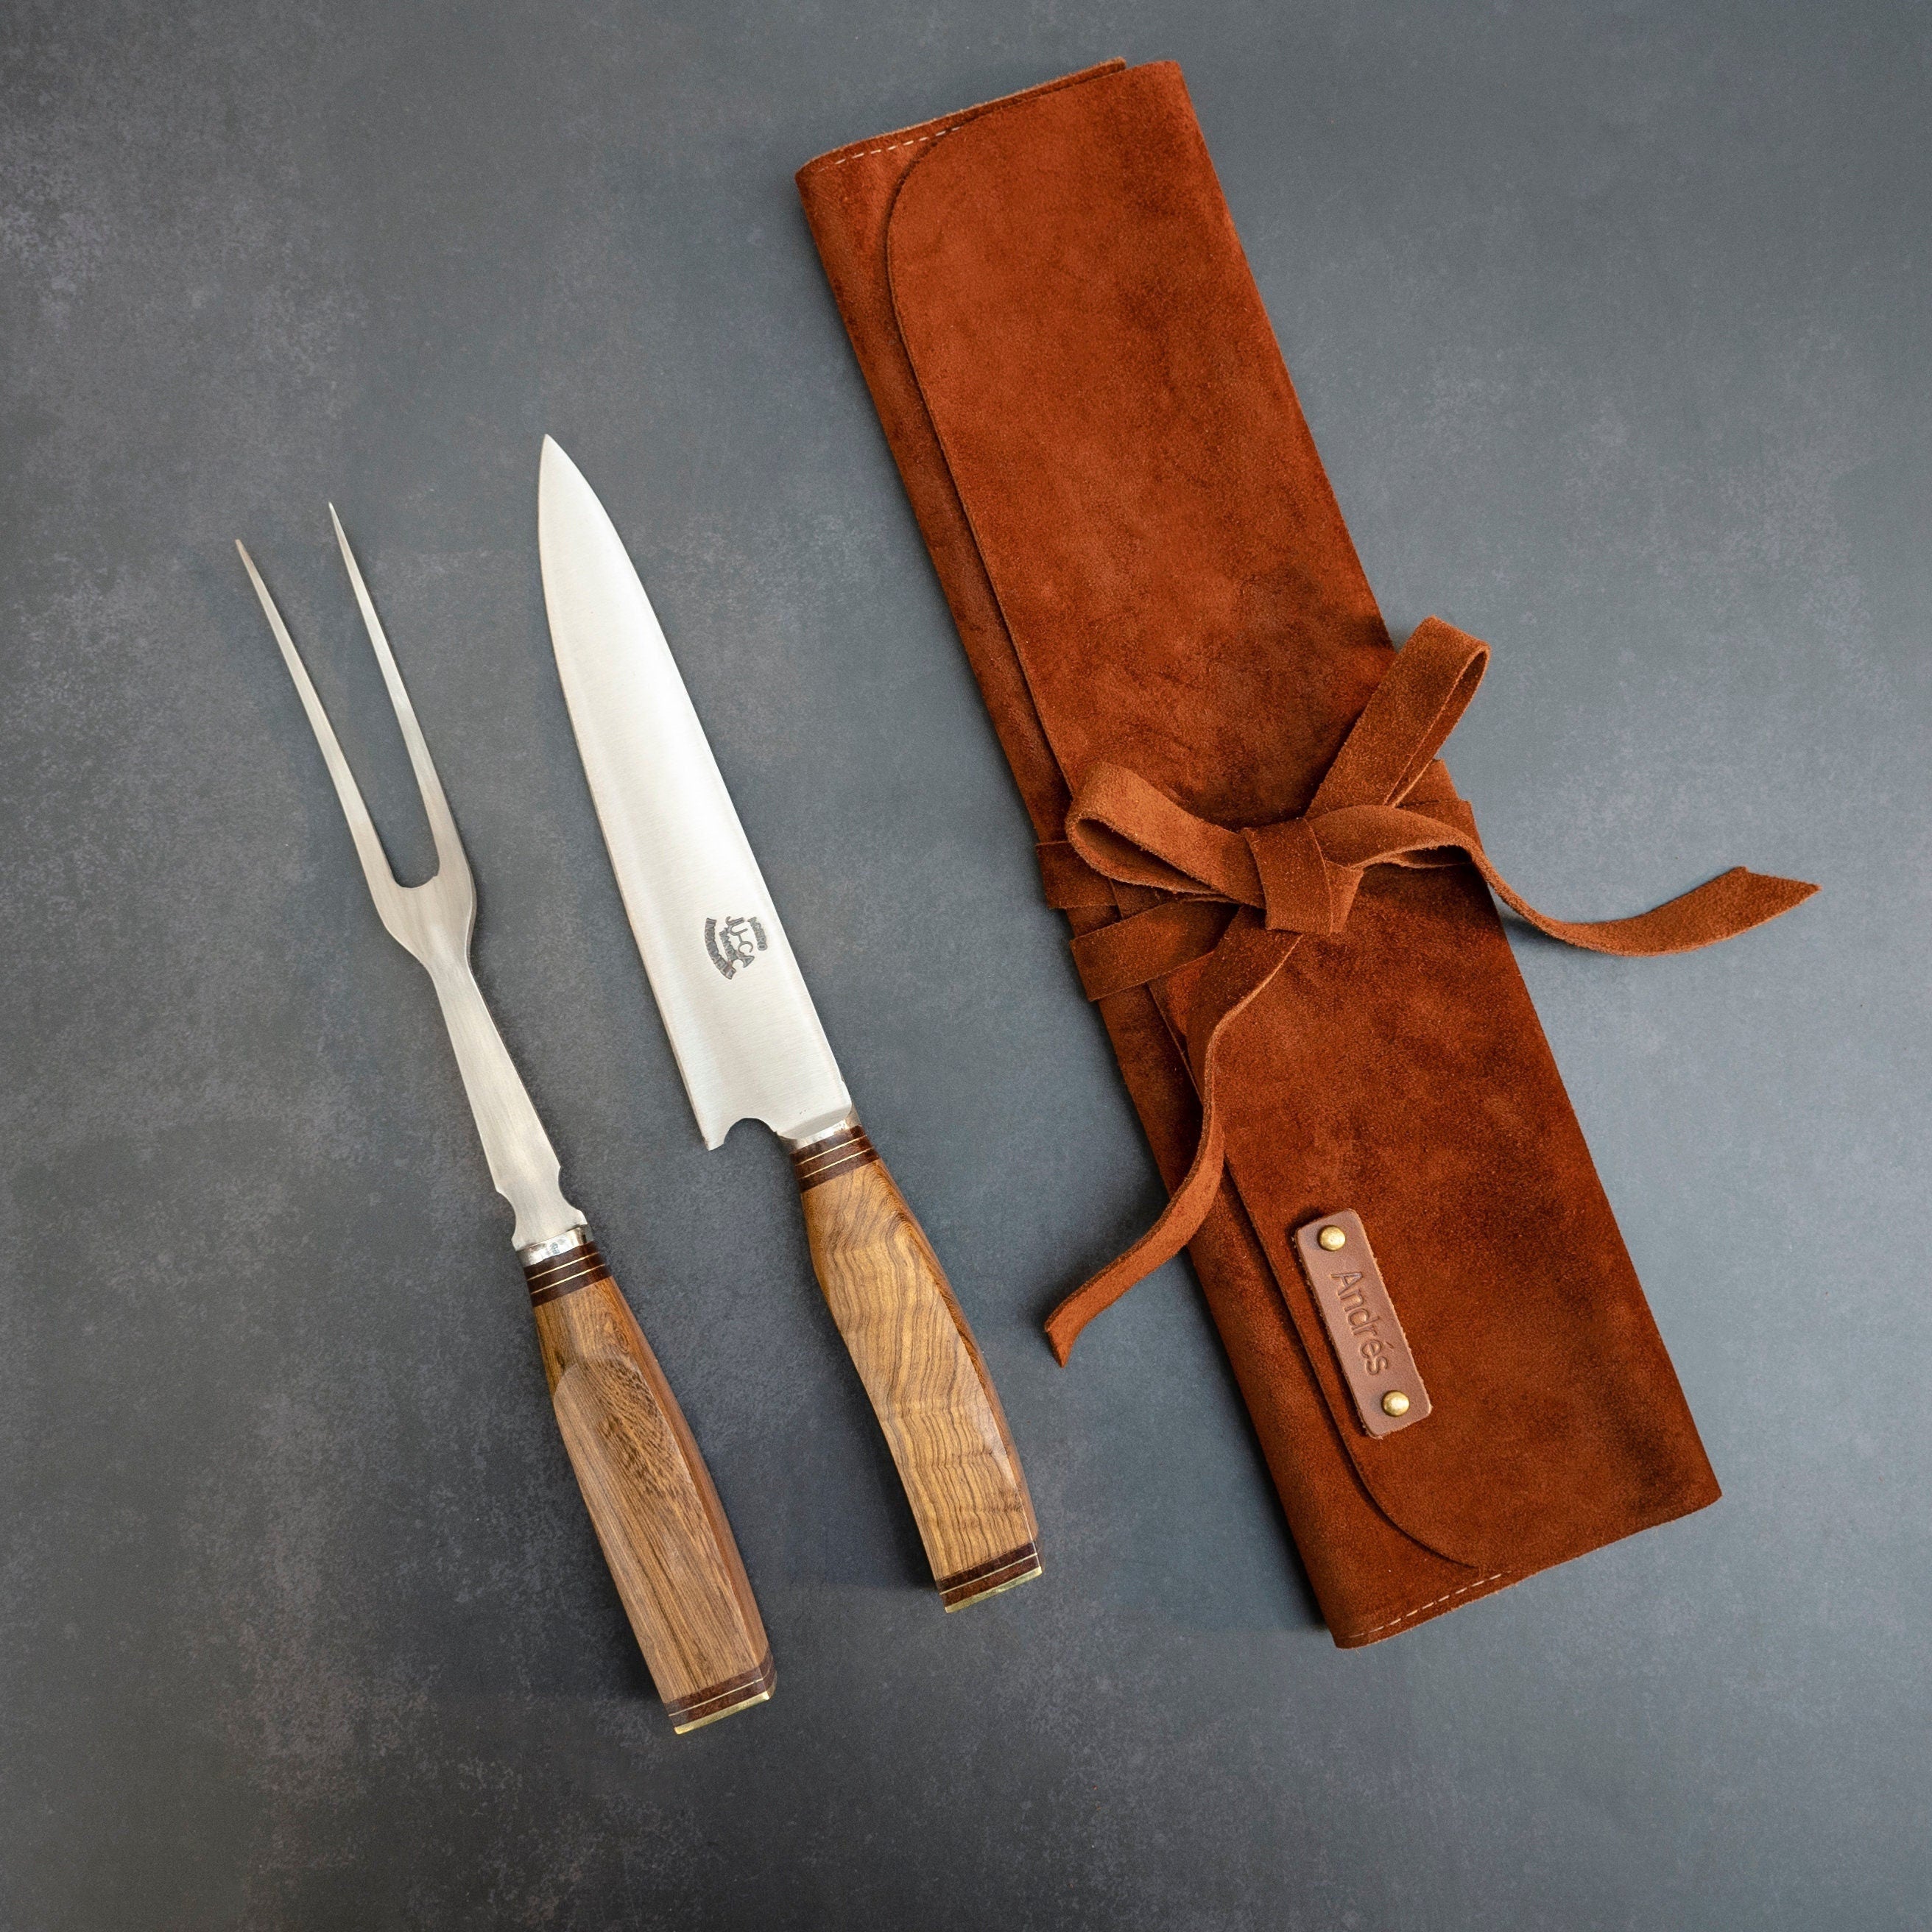 Gaucholife Wood Gaucho Knife and Fork Carving Set,